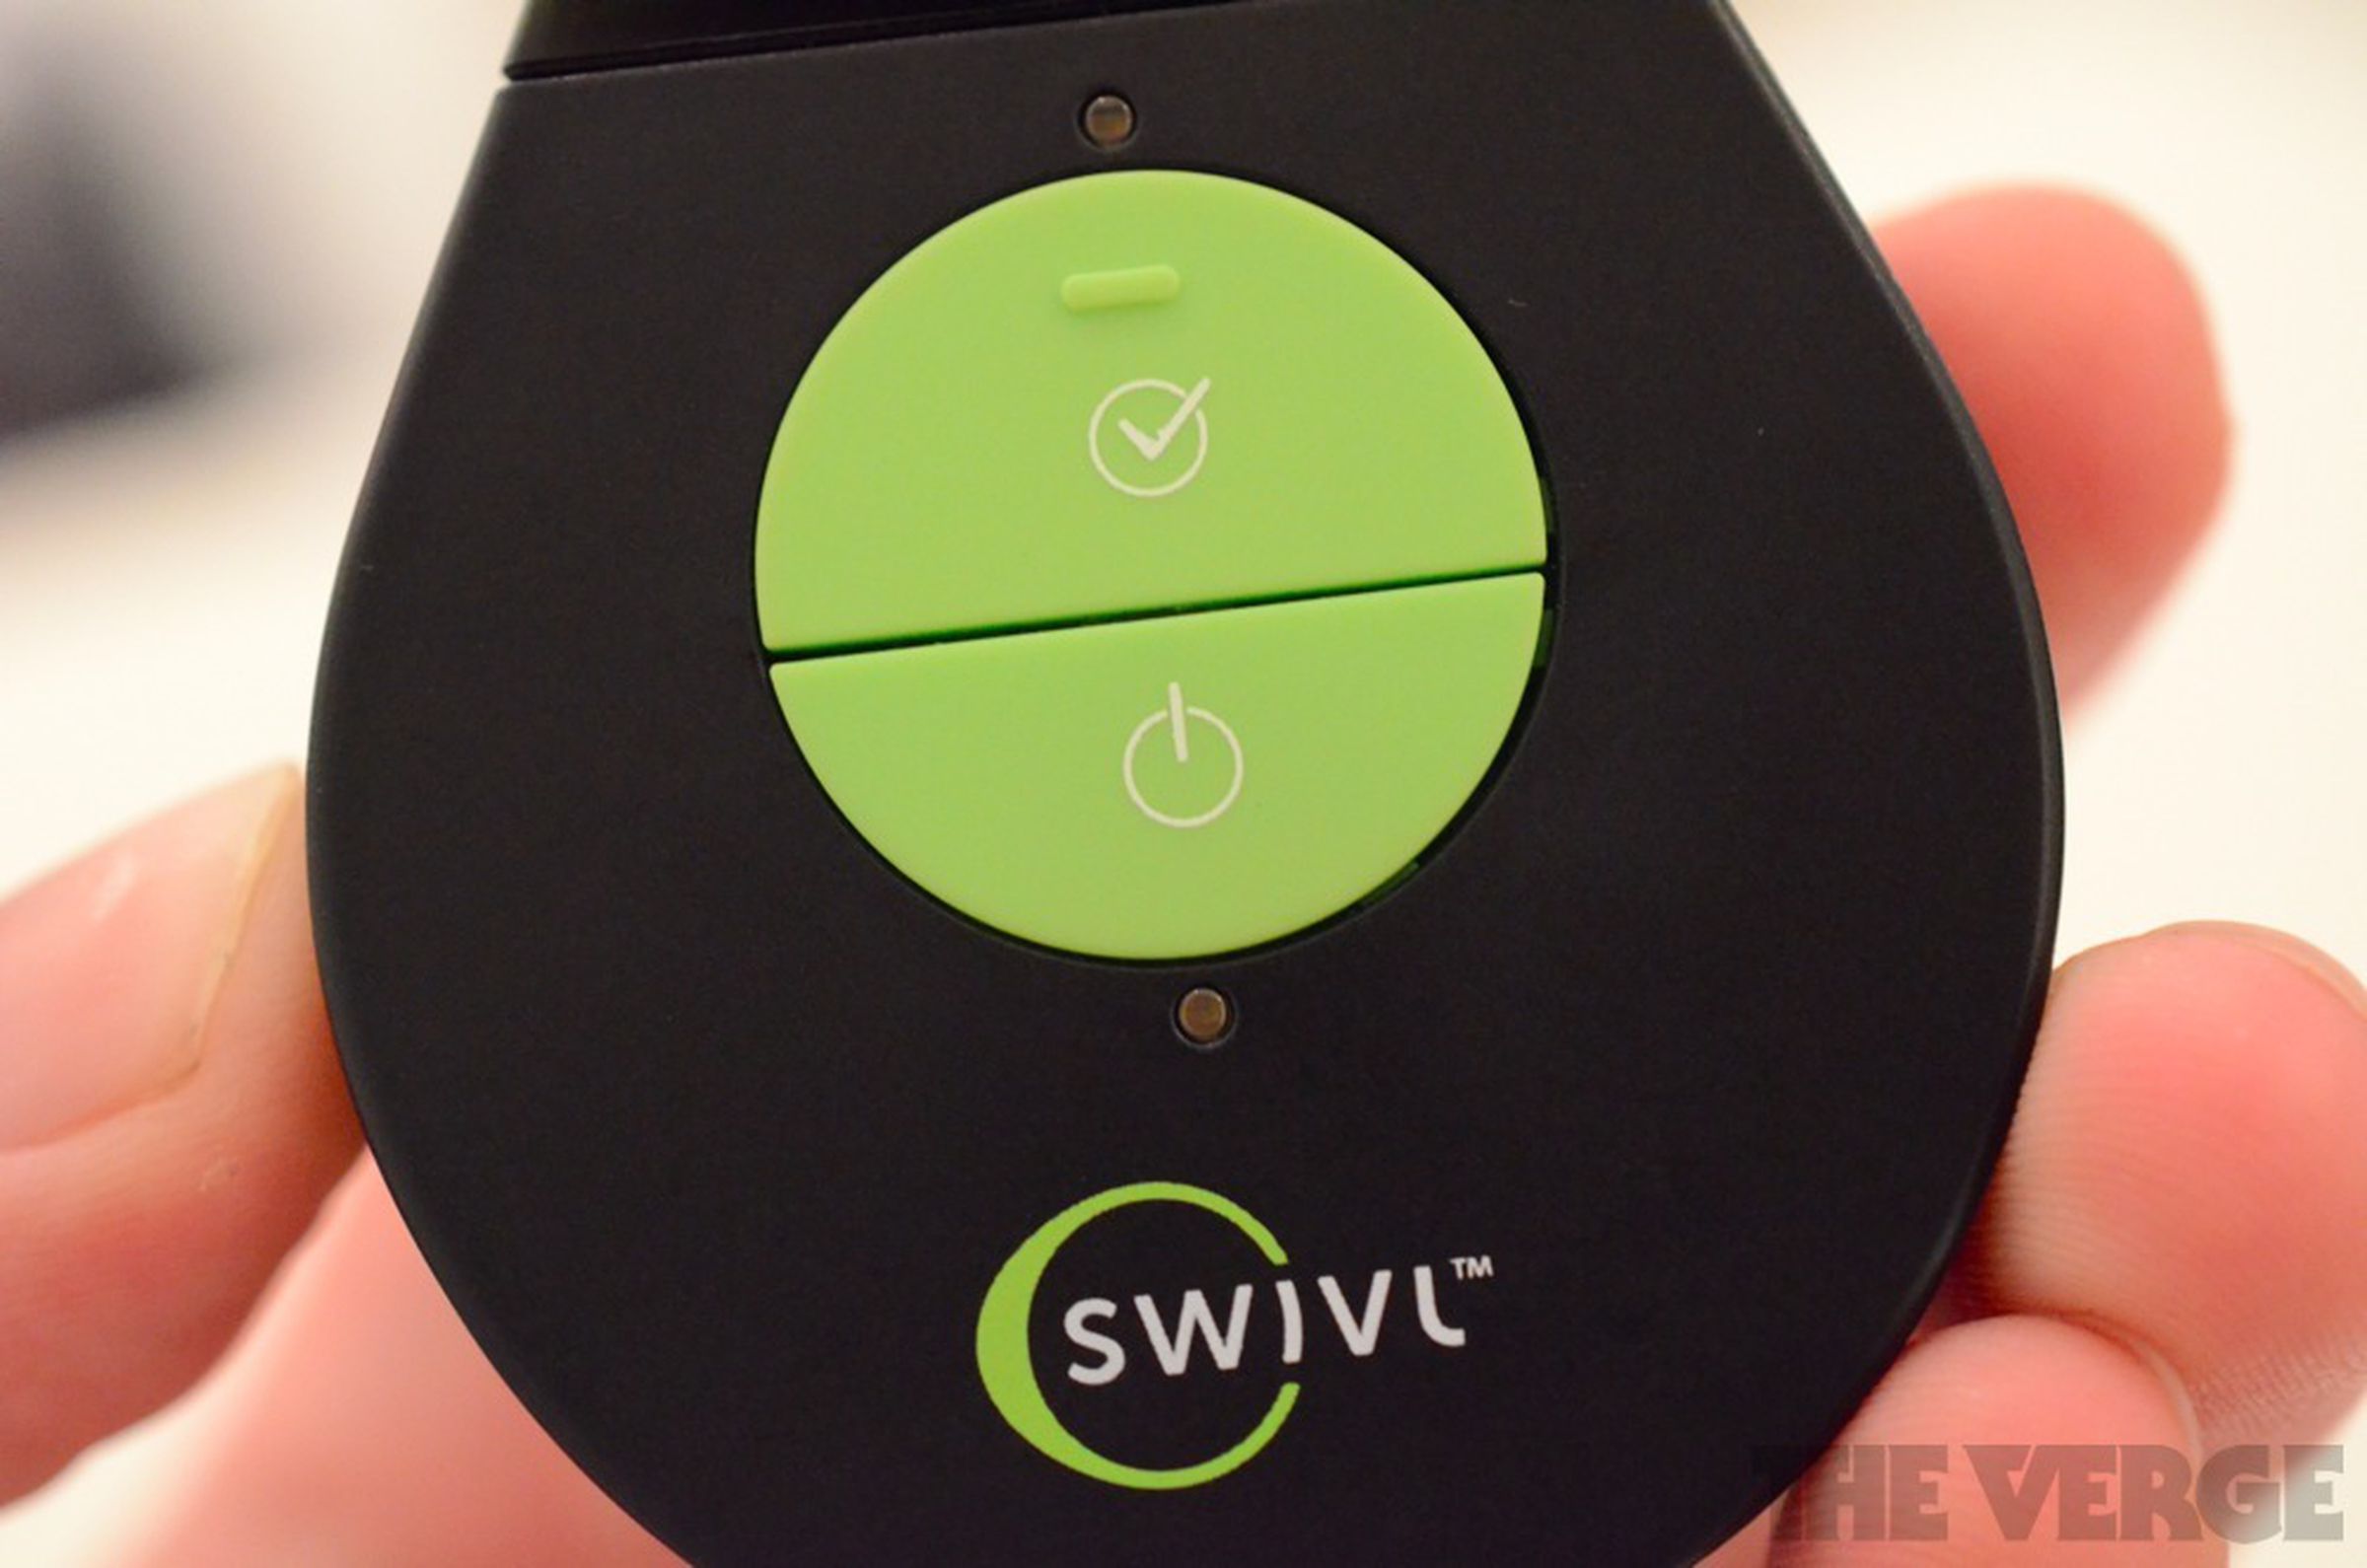 Swivl hands-on pictures